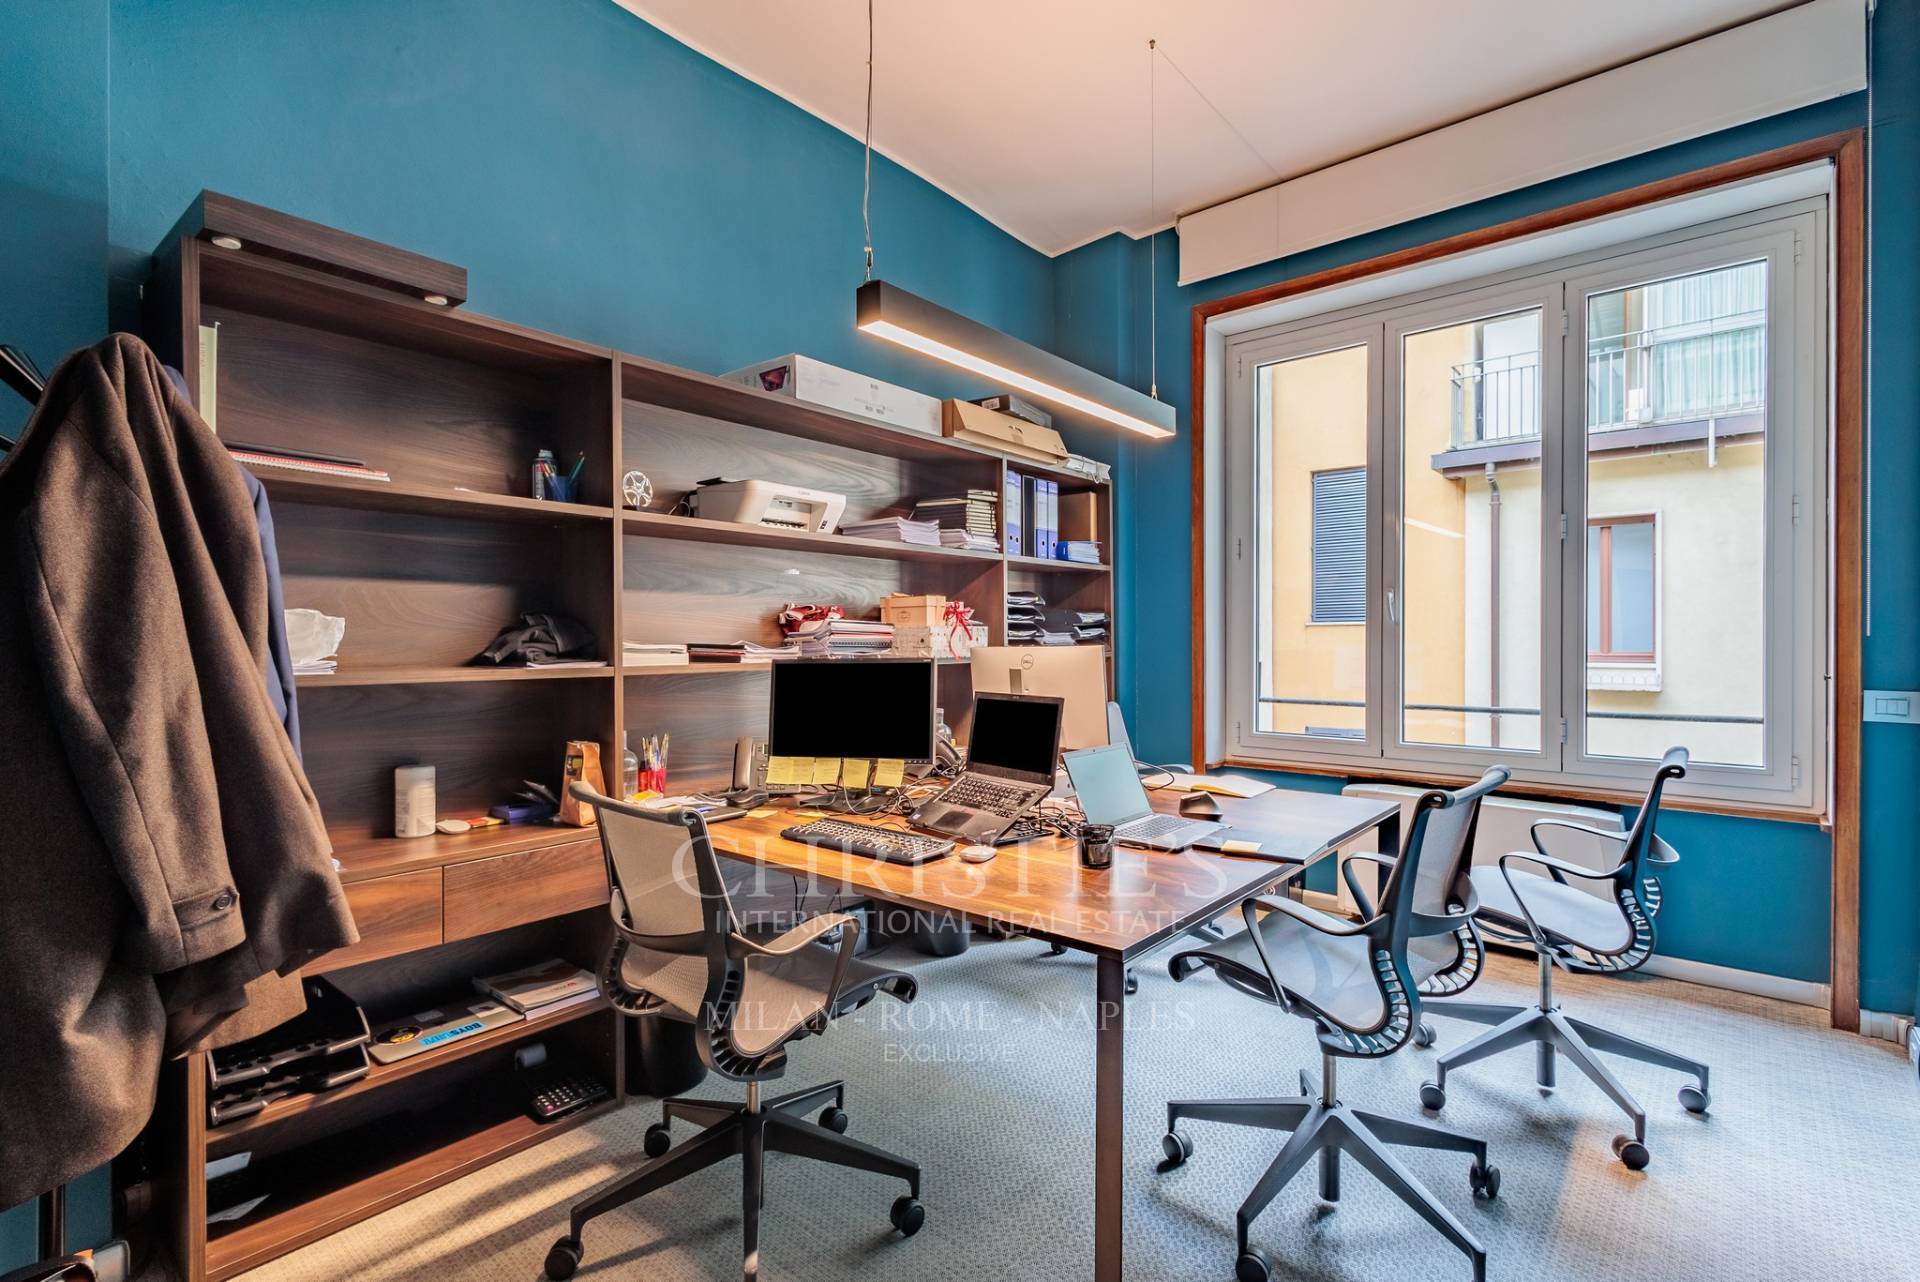 picture of Office/showroom For Rent In Milan's Fashion District